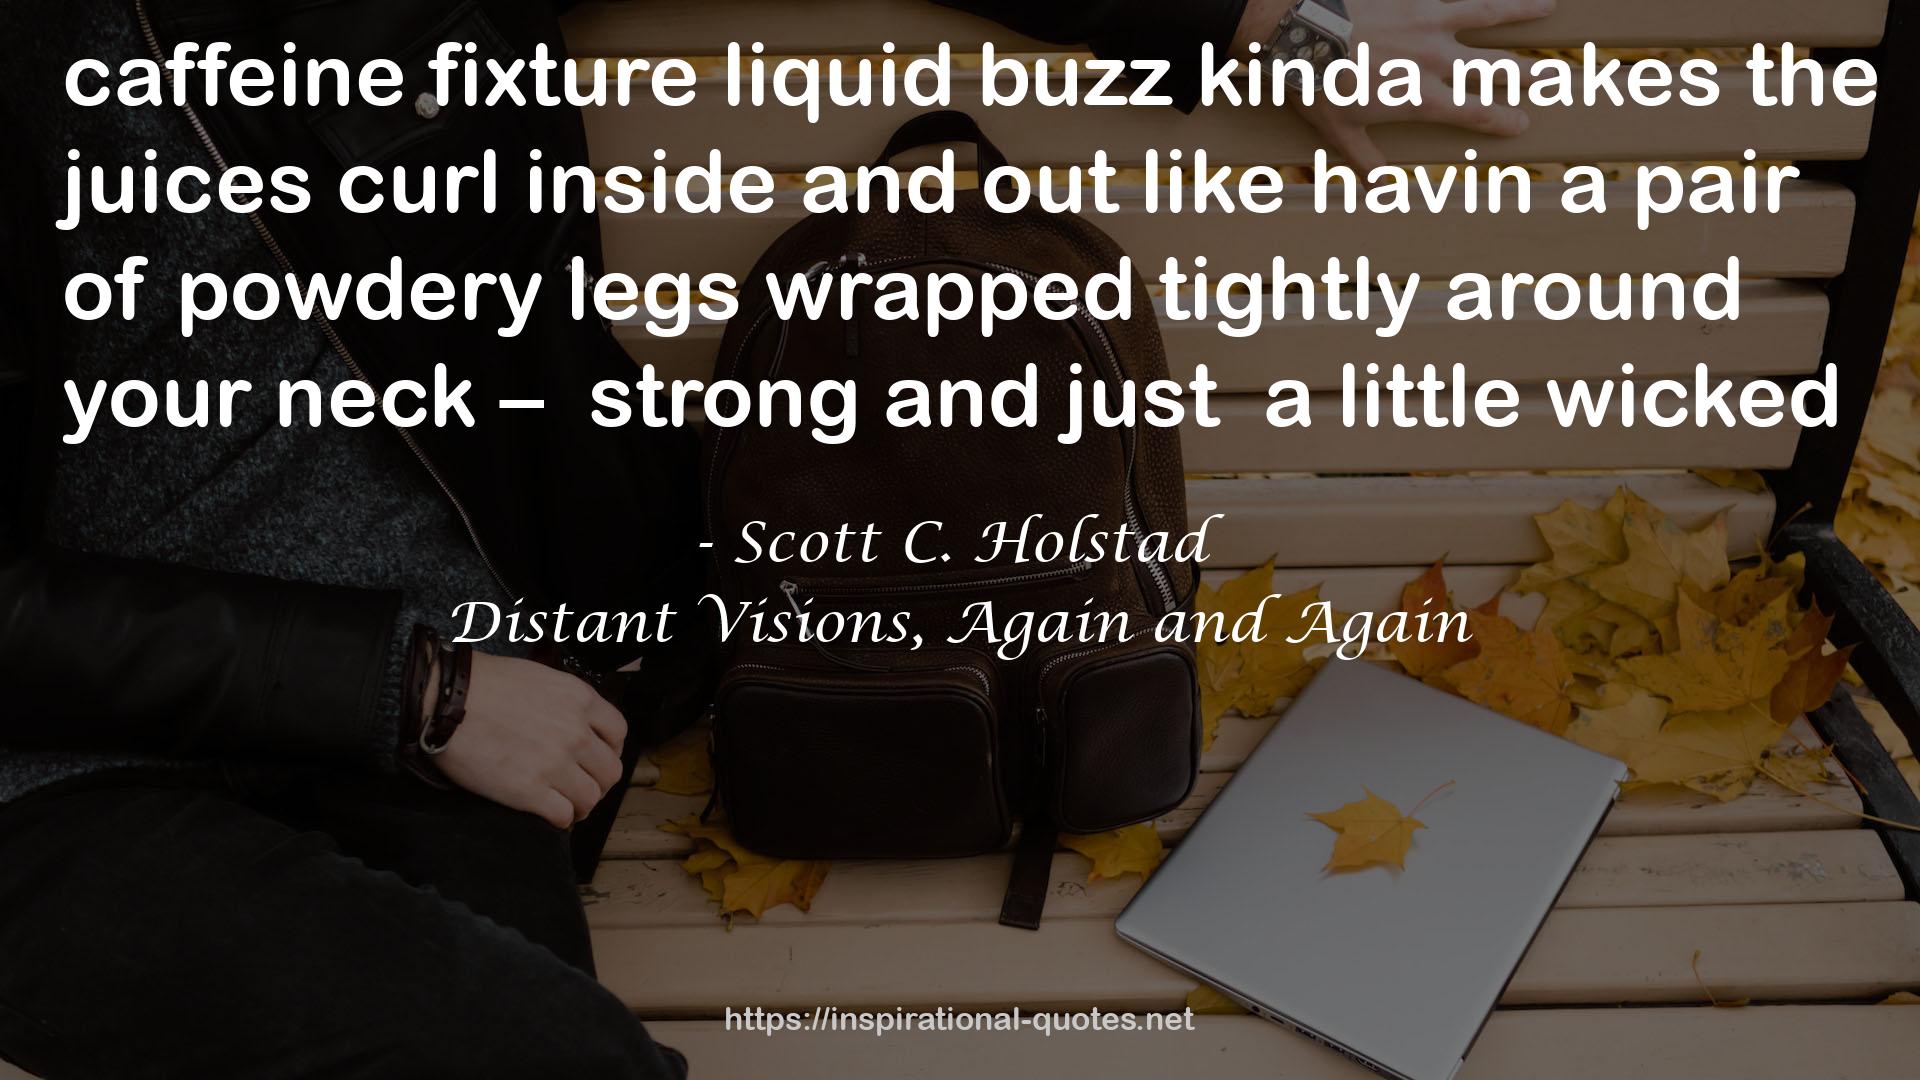 Scott C. Holstad quote : caffeine fixture<br />liquid buzz<br />kinda makes the<br />juices curl<br />inside and<br />out<br />like havin<br />a pair of<br />powdery legs<br />wrapped<br />tightly<br />around<br />your neck – <br />strong<br />and just <br />a little<br />wicked